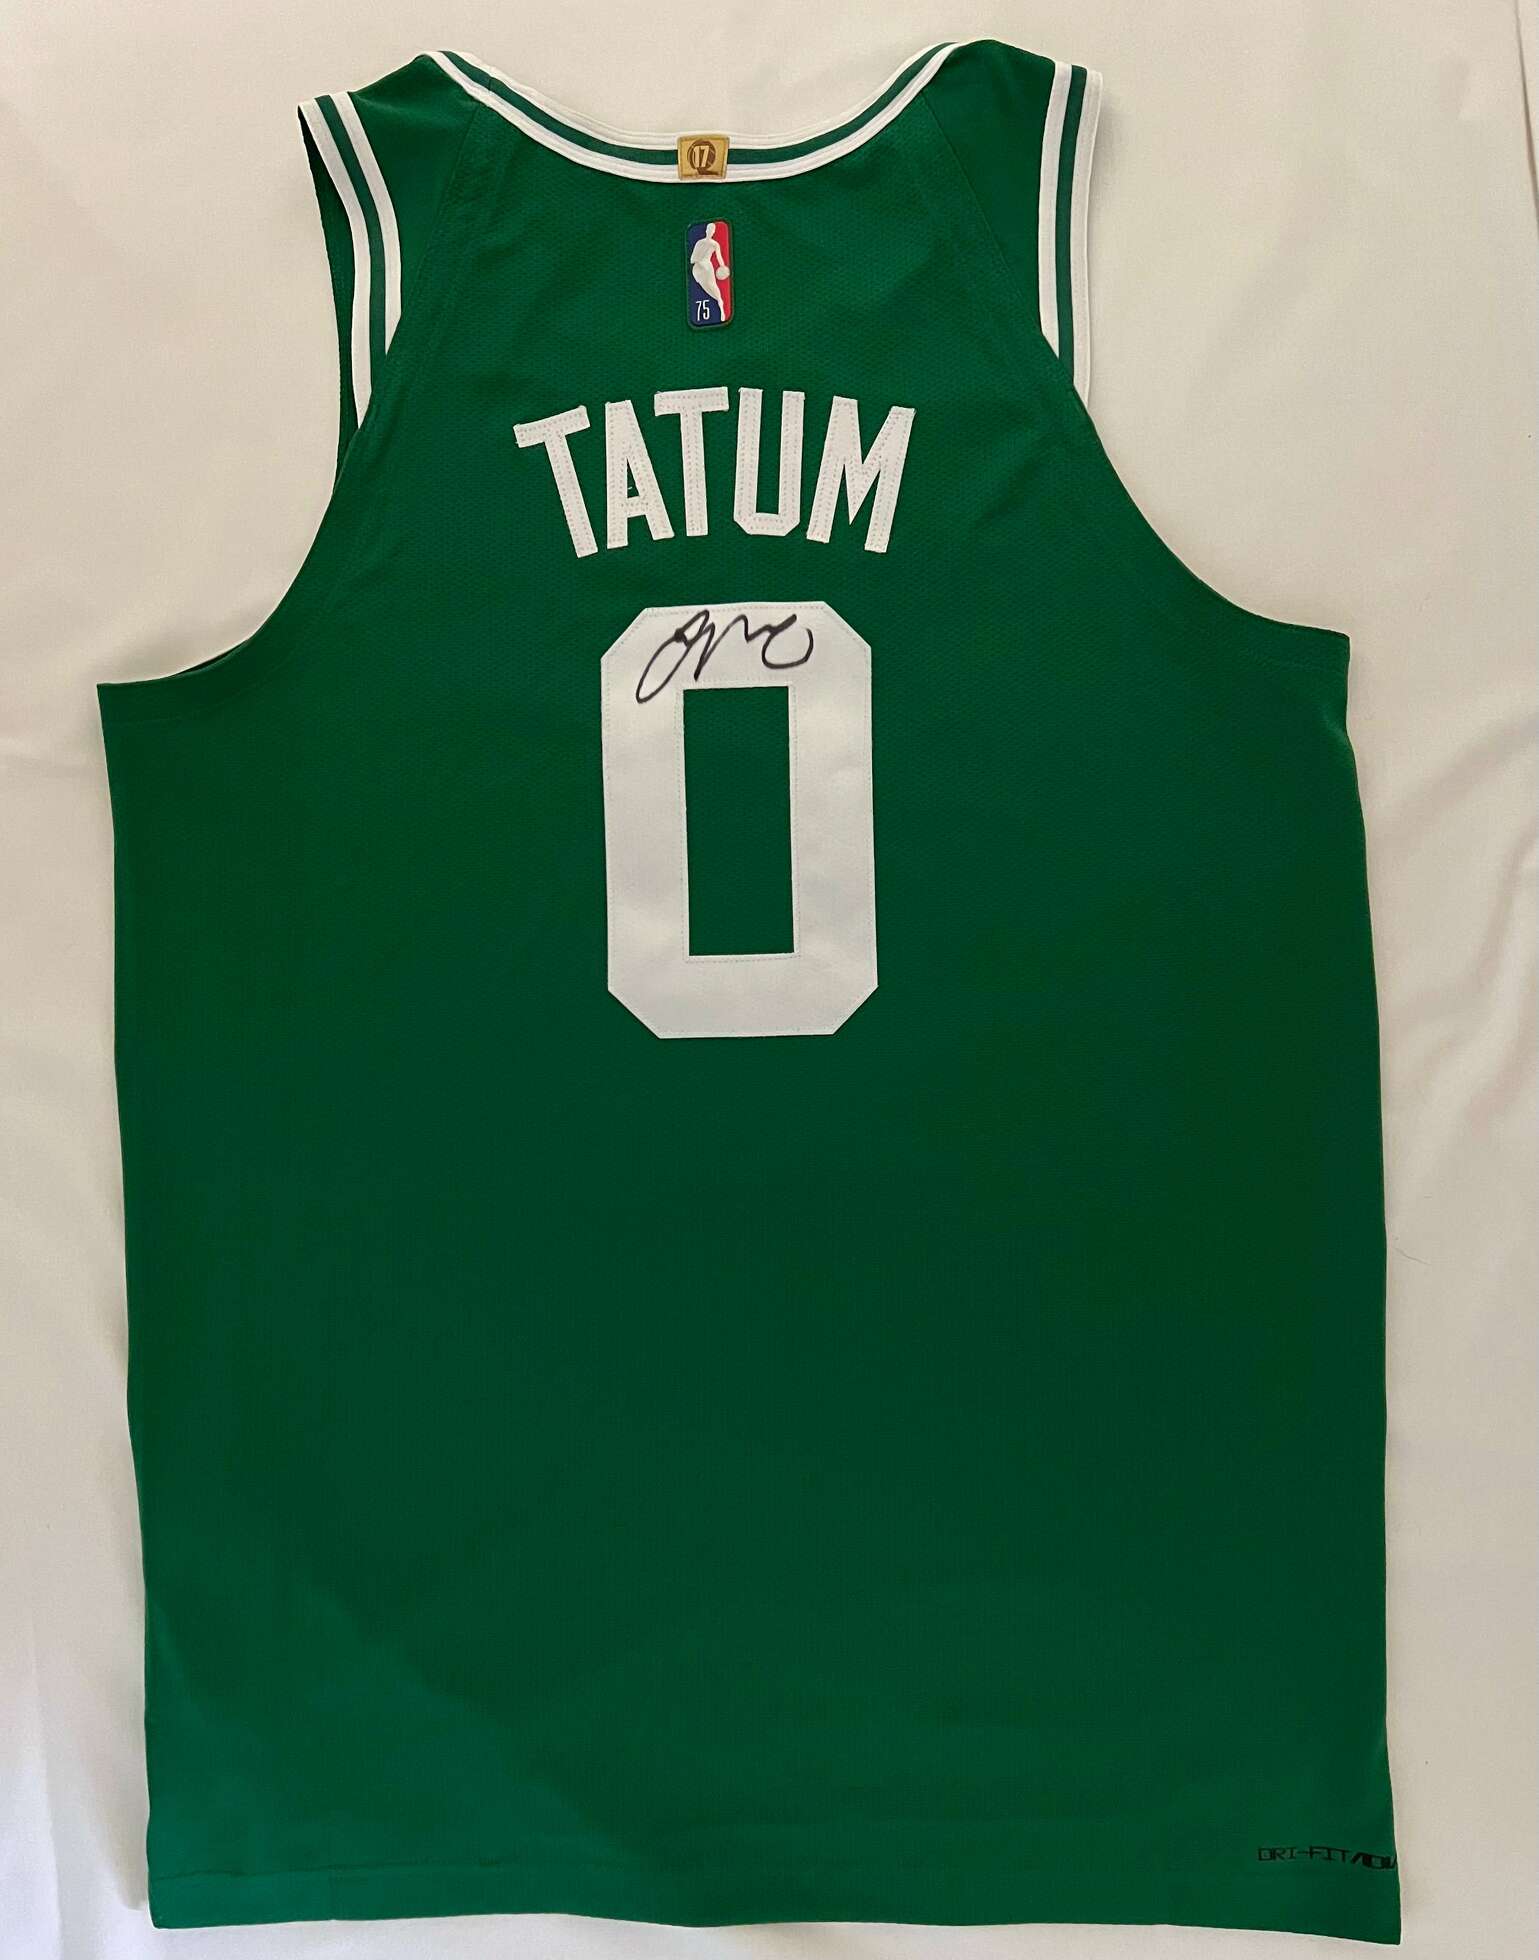 Celtics Experience - (2) Court-Side Tickets plus team-signed Basketball & Jersey signed by Jayson Tatum  - image 7